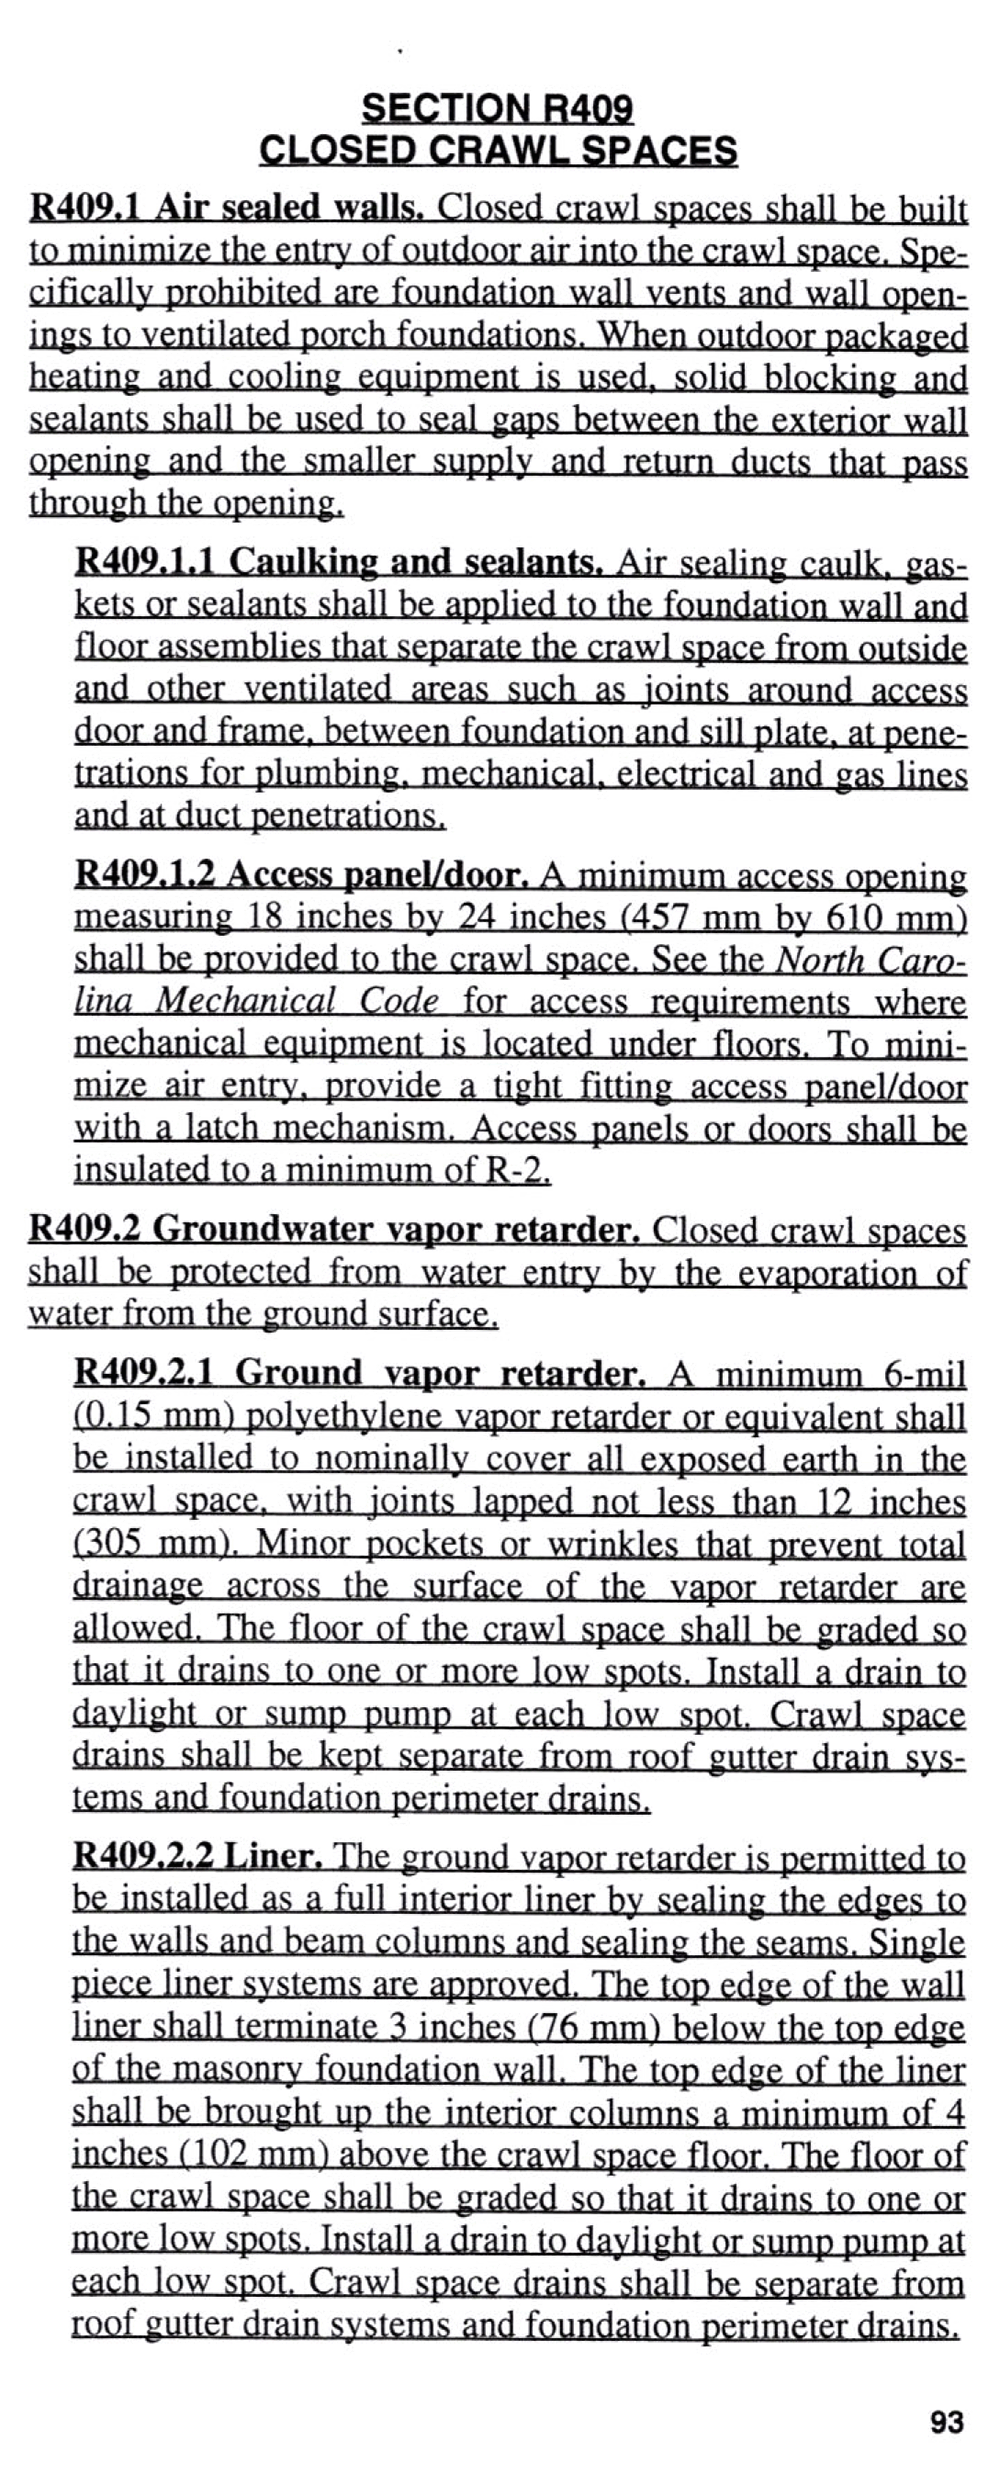 First page of Closed Crawl Space Codes